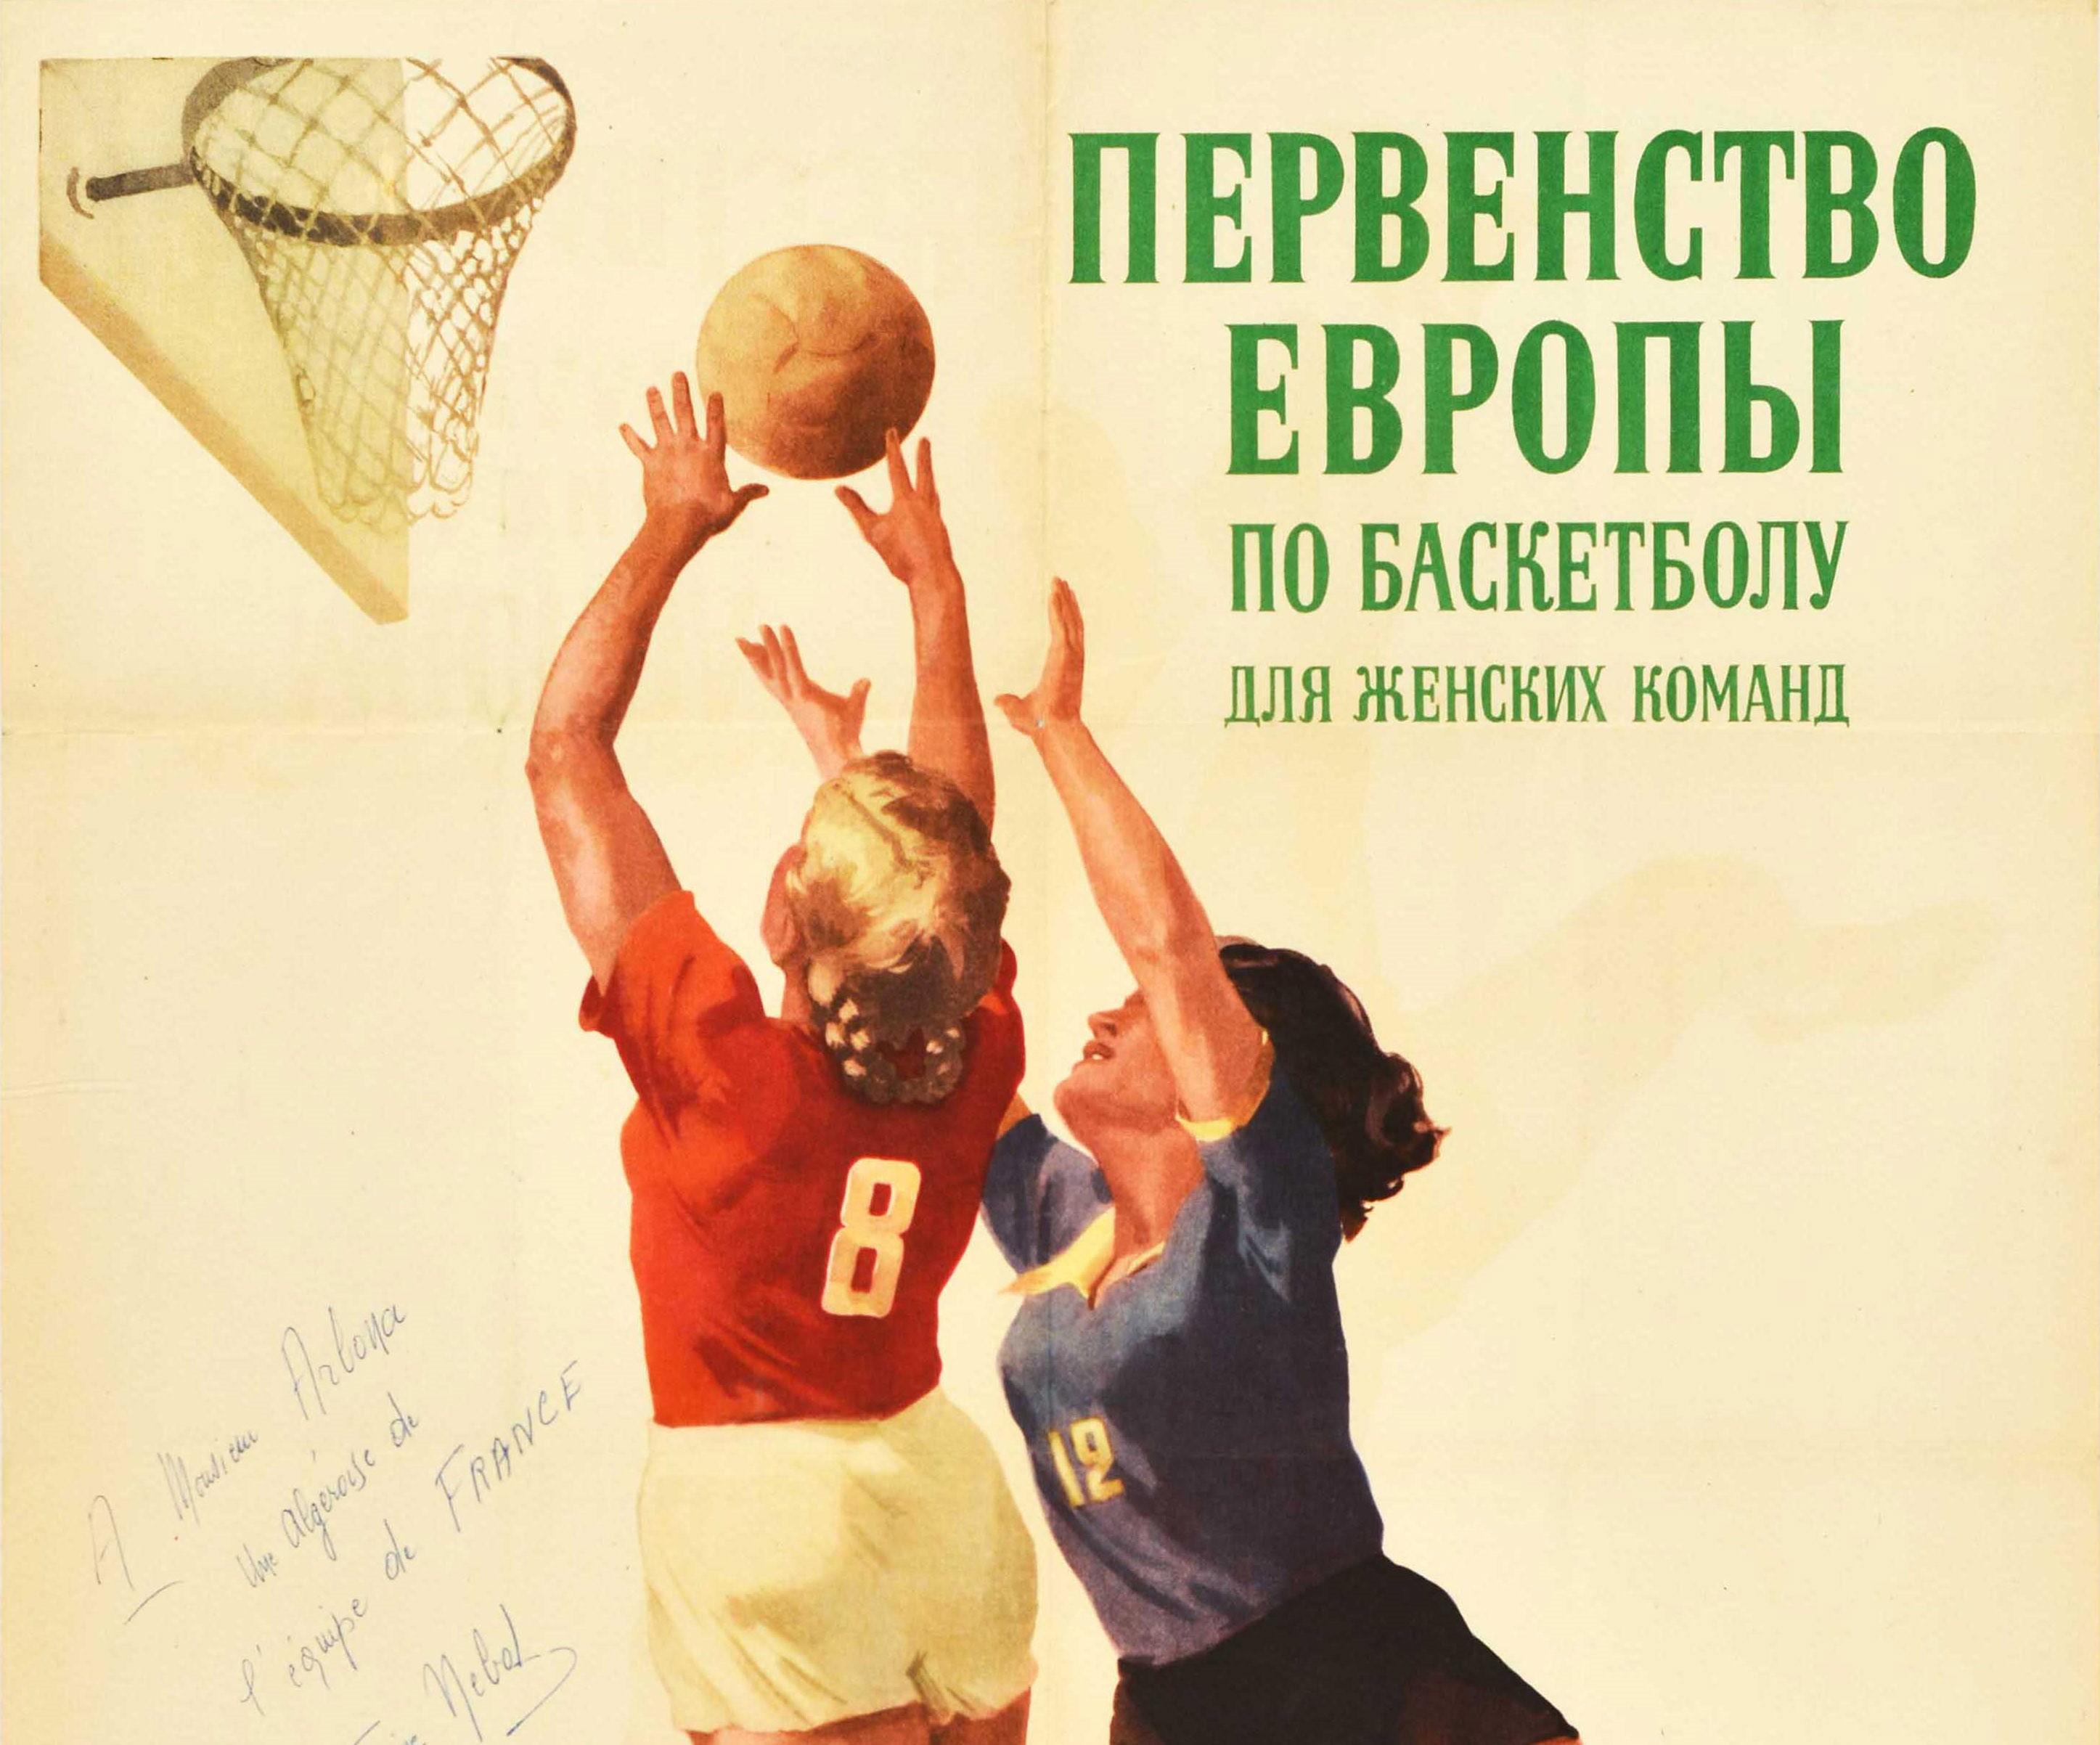 Original vintage sport poster for the European Basketball Championship for Women's Teams held in Moscow at the Dynamo Stadium on 18-25 May 1952 - Первенство Европы по баскетболу для женских команд Москва стадион Динамо - featuring an illustration of